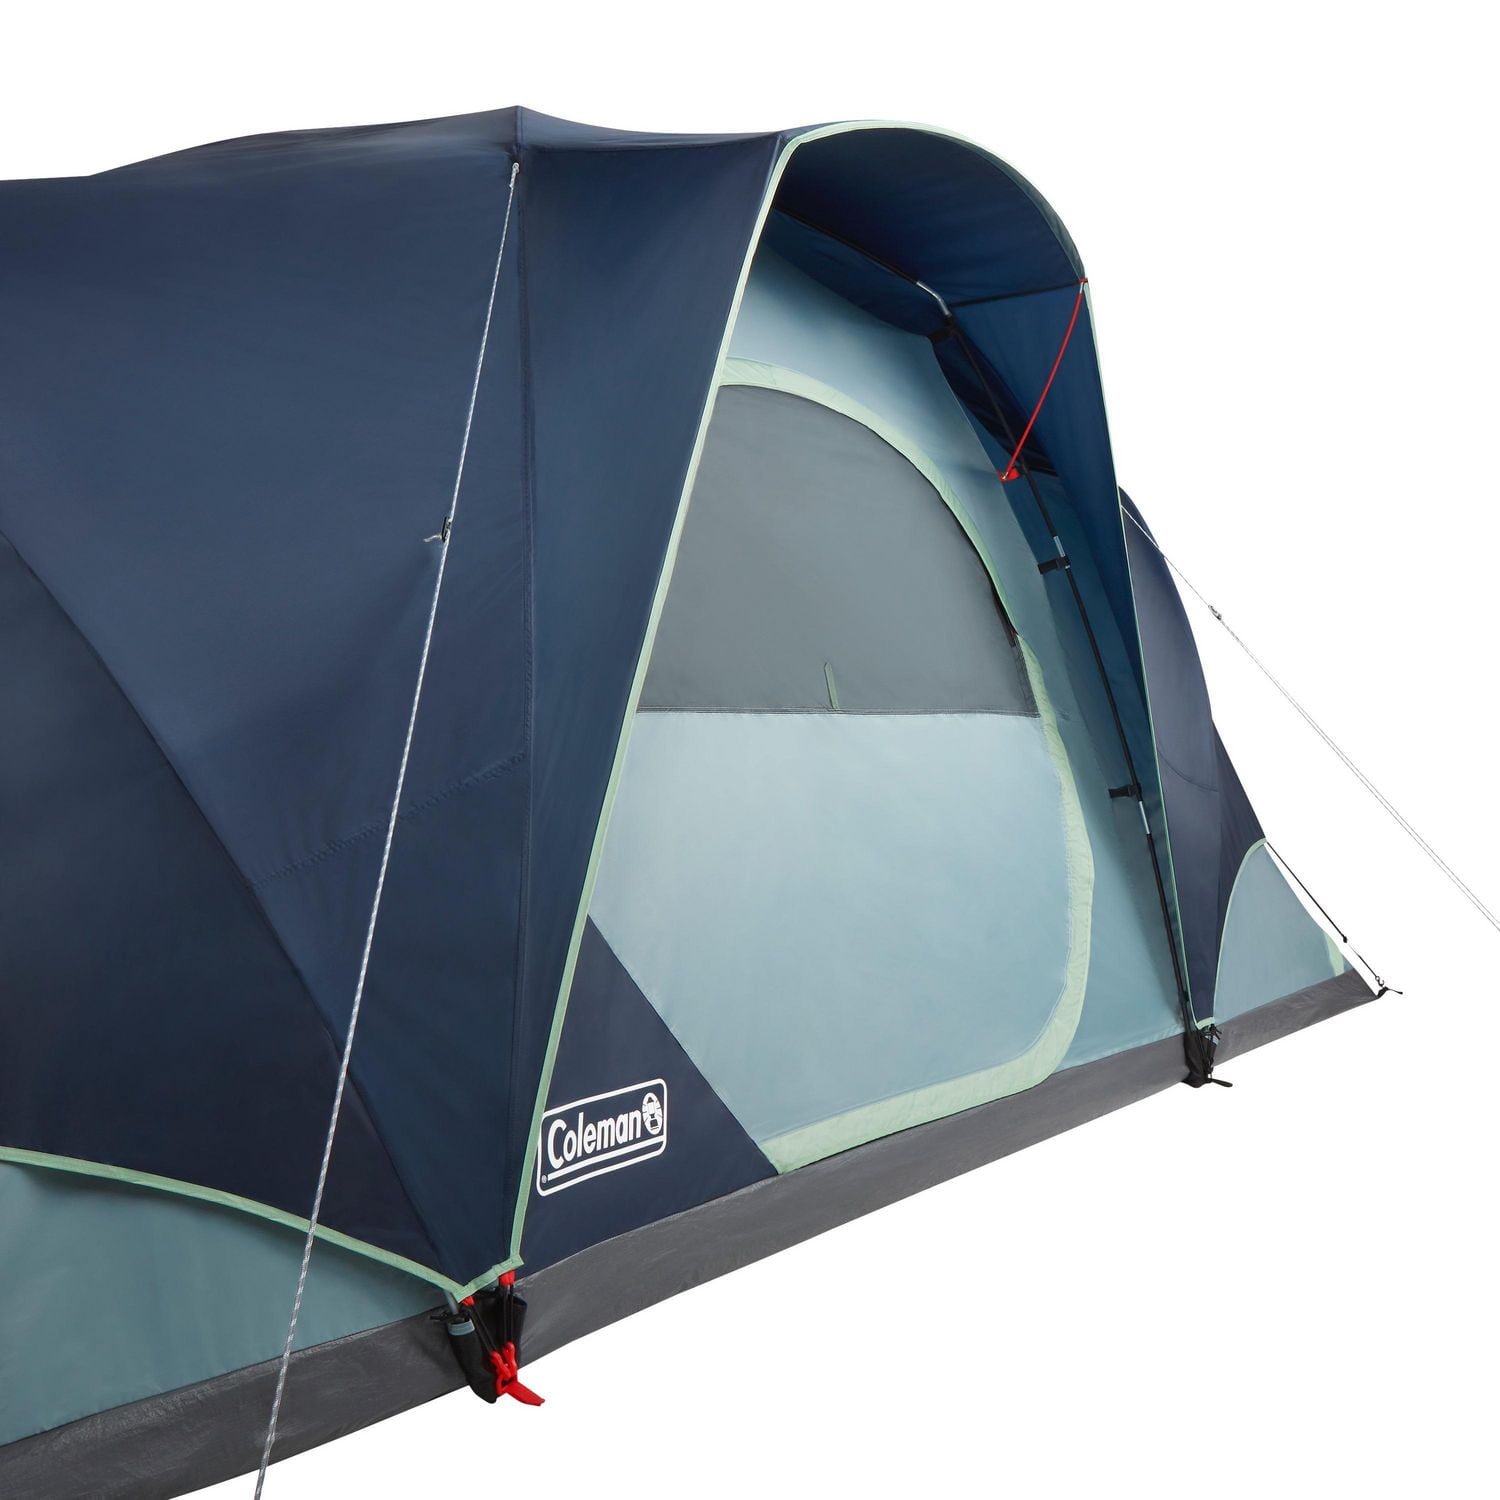 Costco Camping Tents and so much more COME SHOP WITH ME 